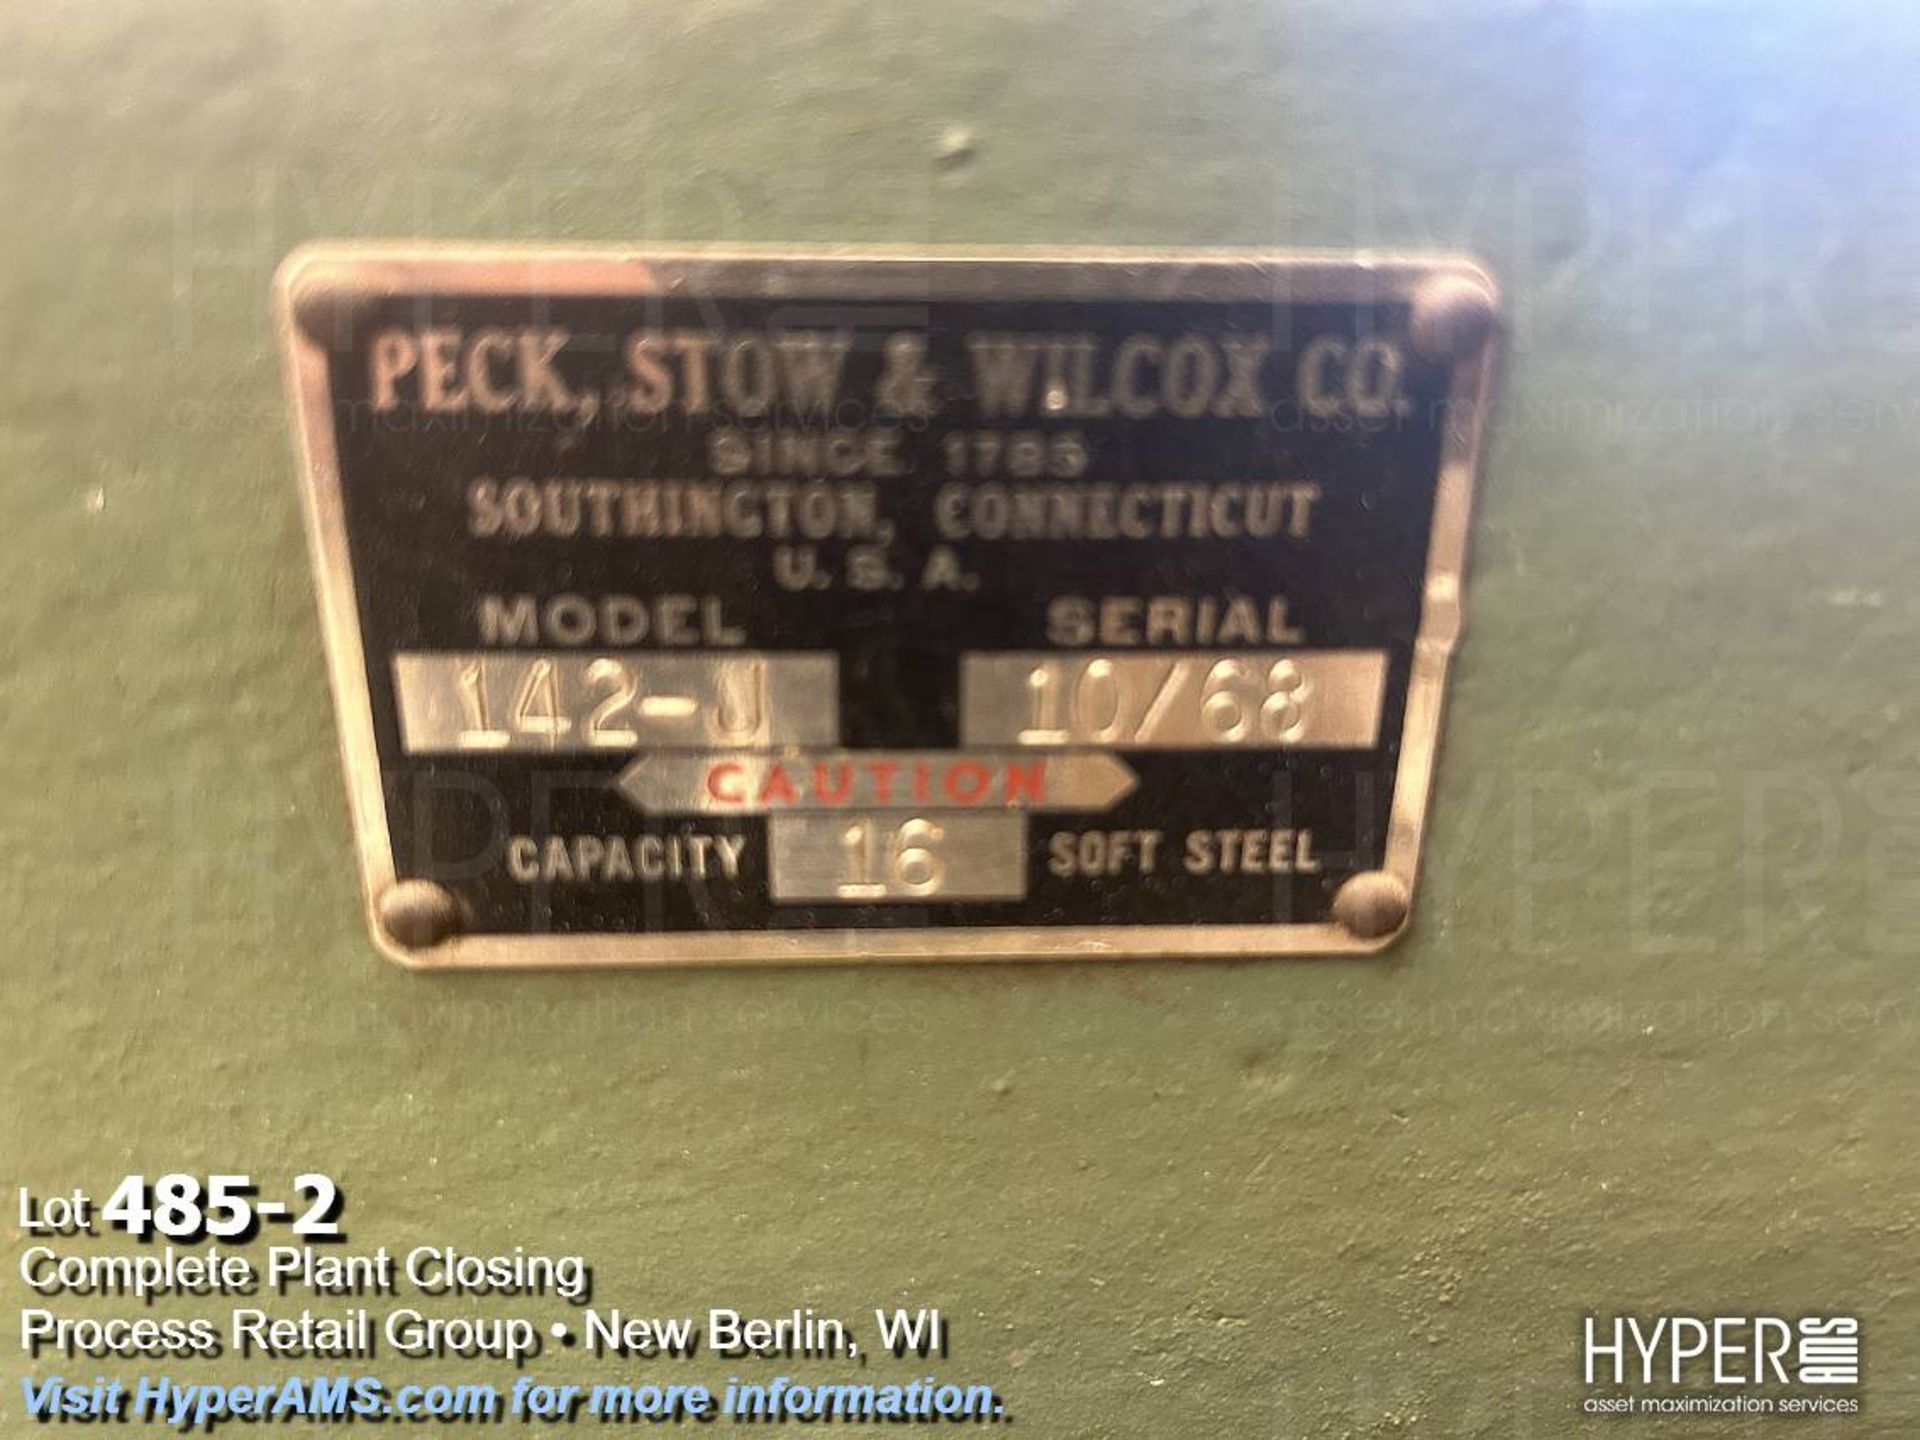 Peck Stow & Wilcox 142-J 16 gage foot pedal sheer - Image 2 of 4